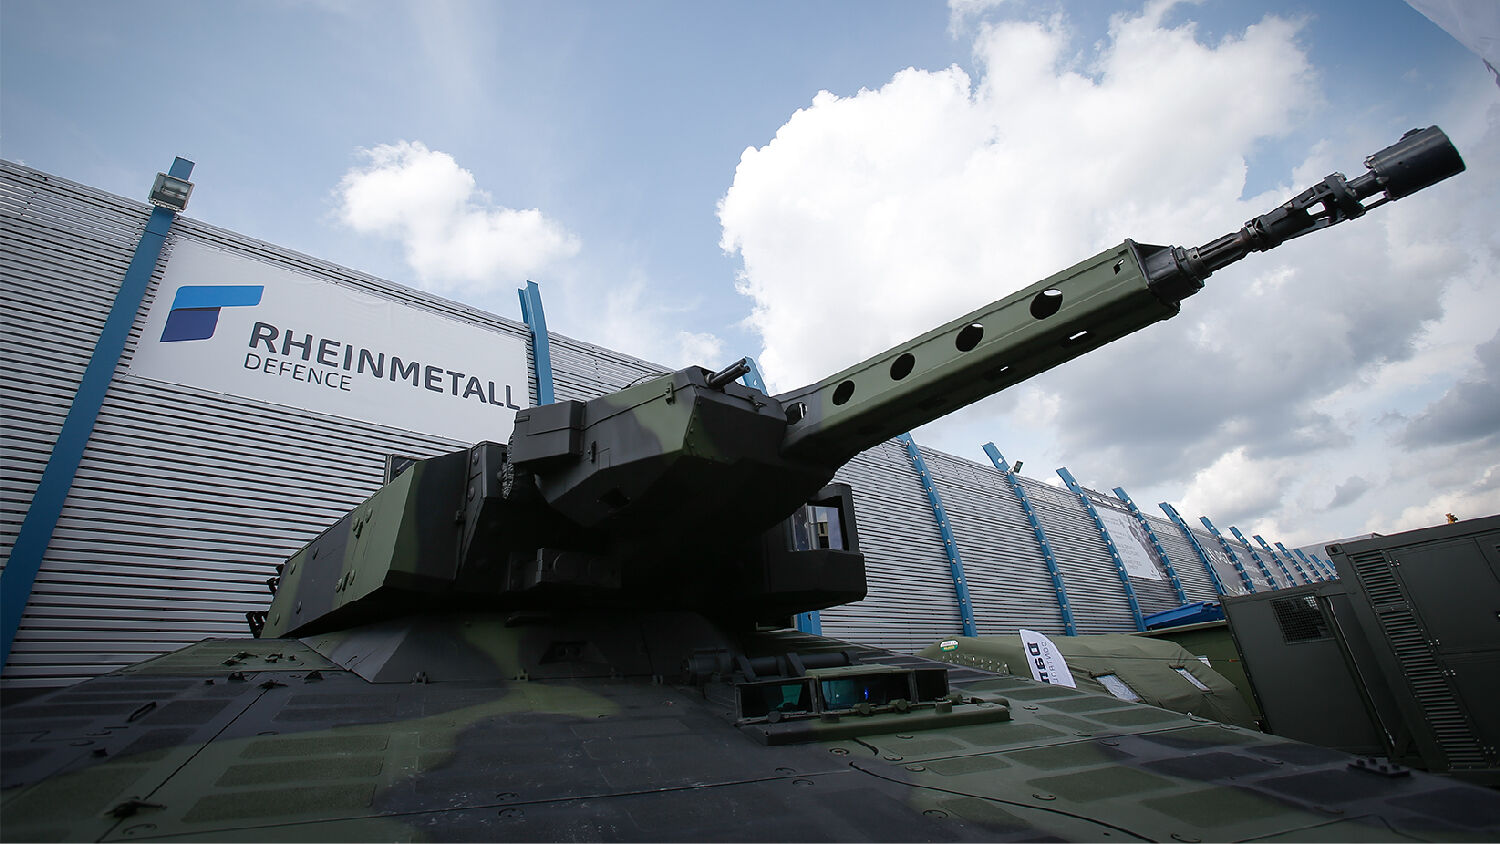 Rheinmetall Benefits From Supercycle In The Arms Industry